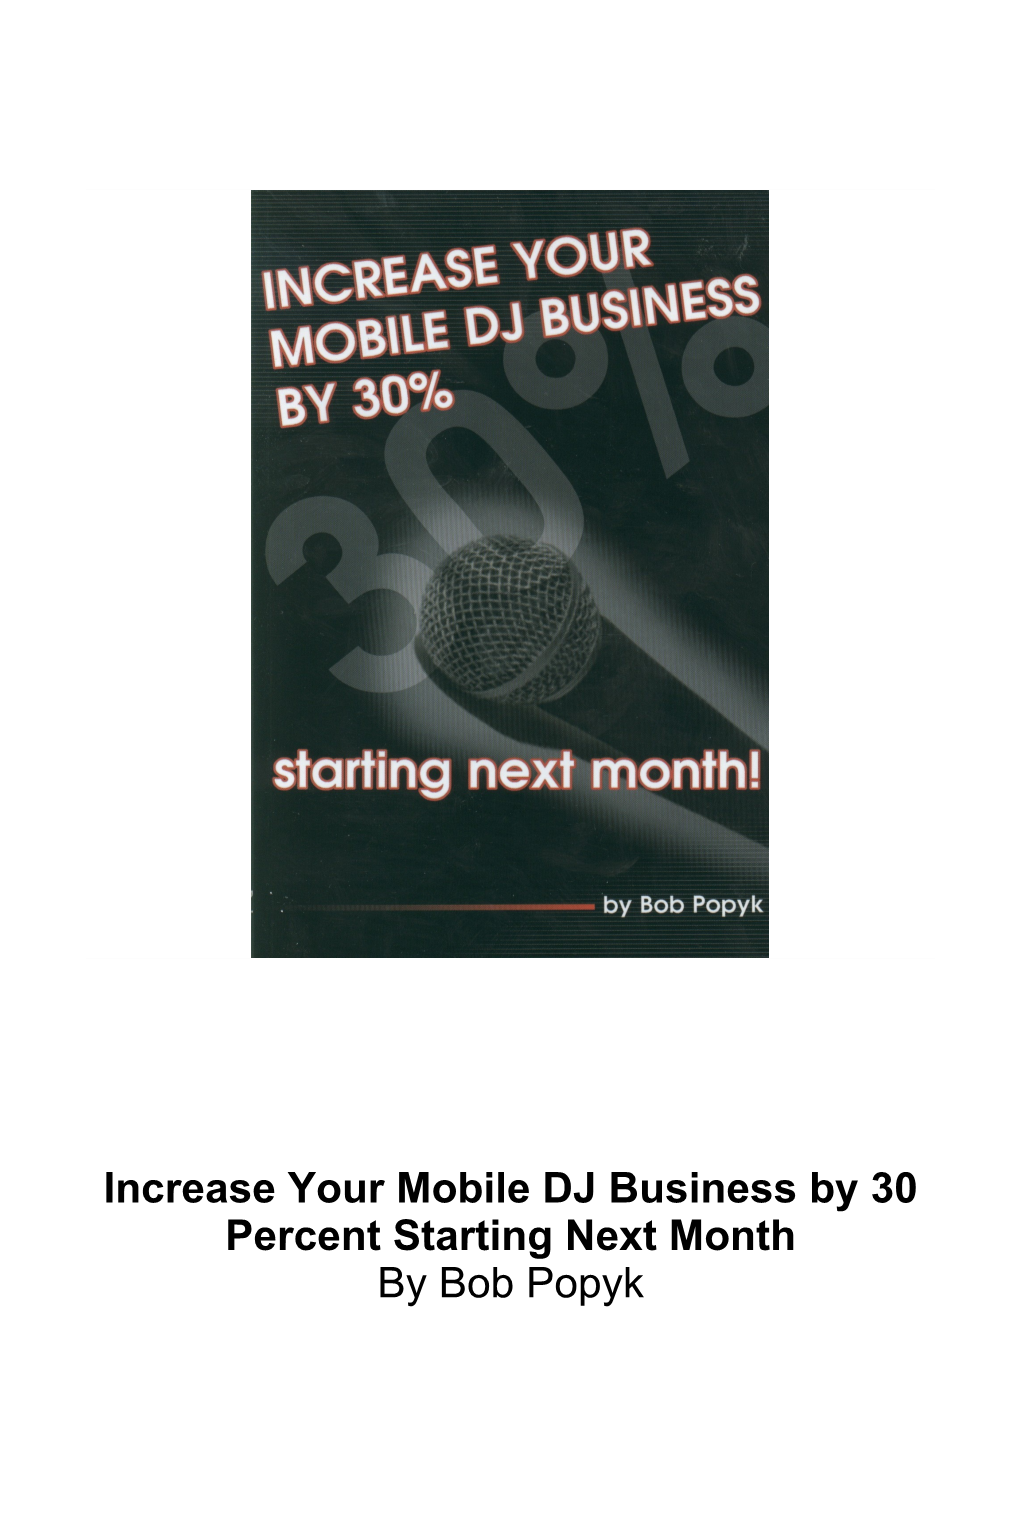 Increase Your Mobile DJ Business by 30 Percent Starting Next Month by Bob Popyk INTRODUCTION